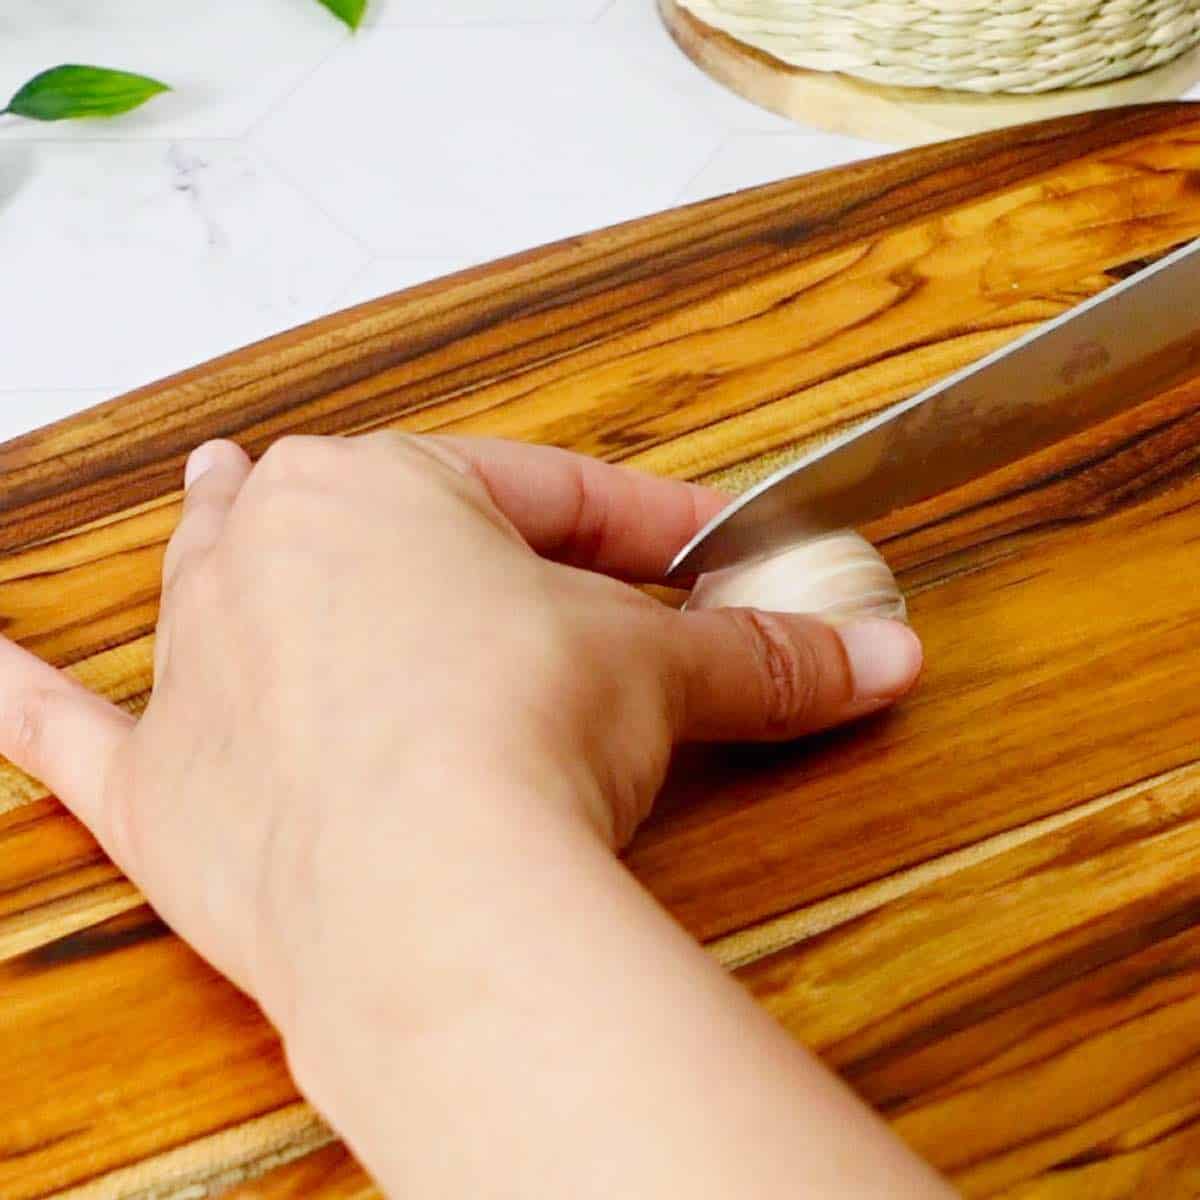 Holding the clove with one hand and placing the sharp edge of the knife on the curved side of the clove.